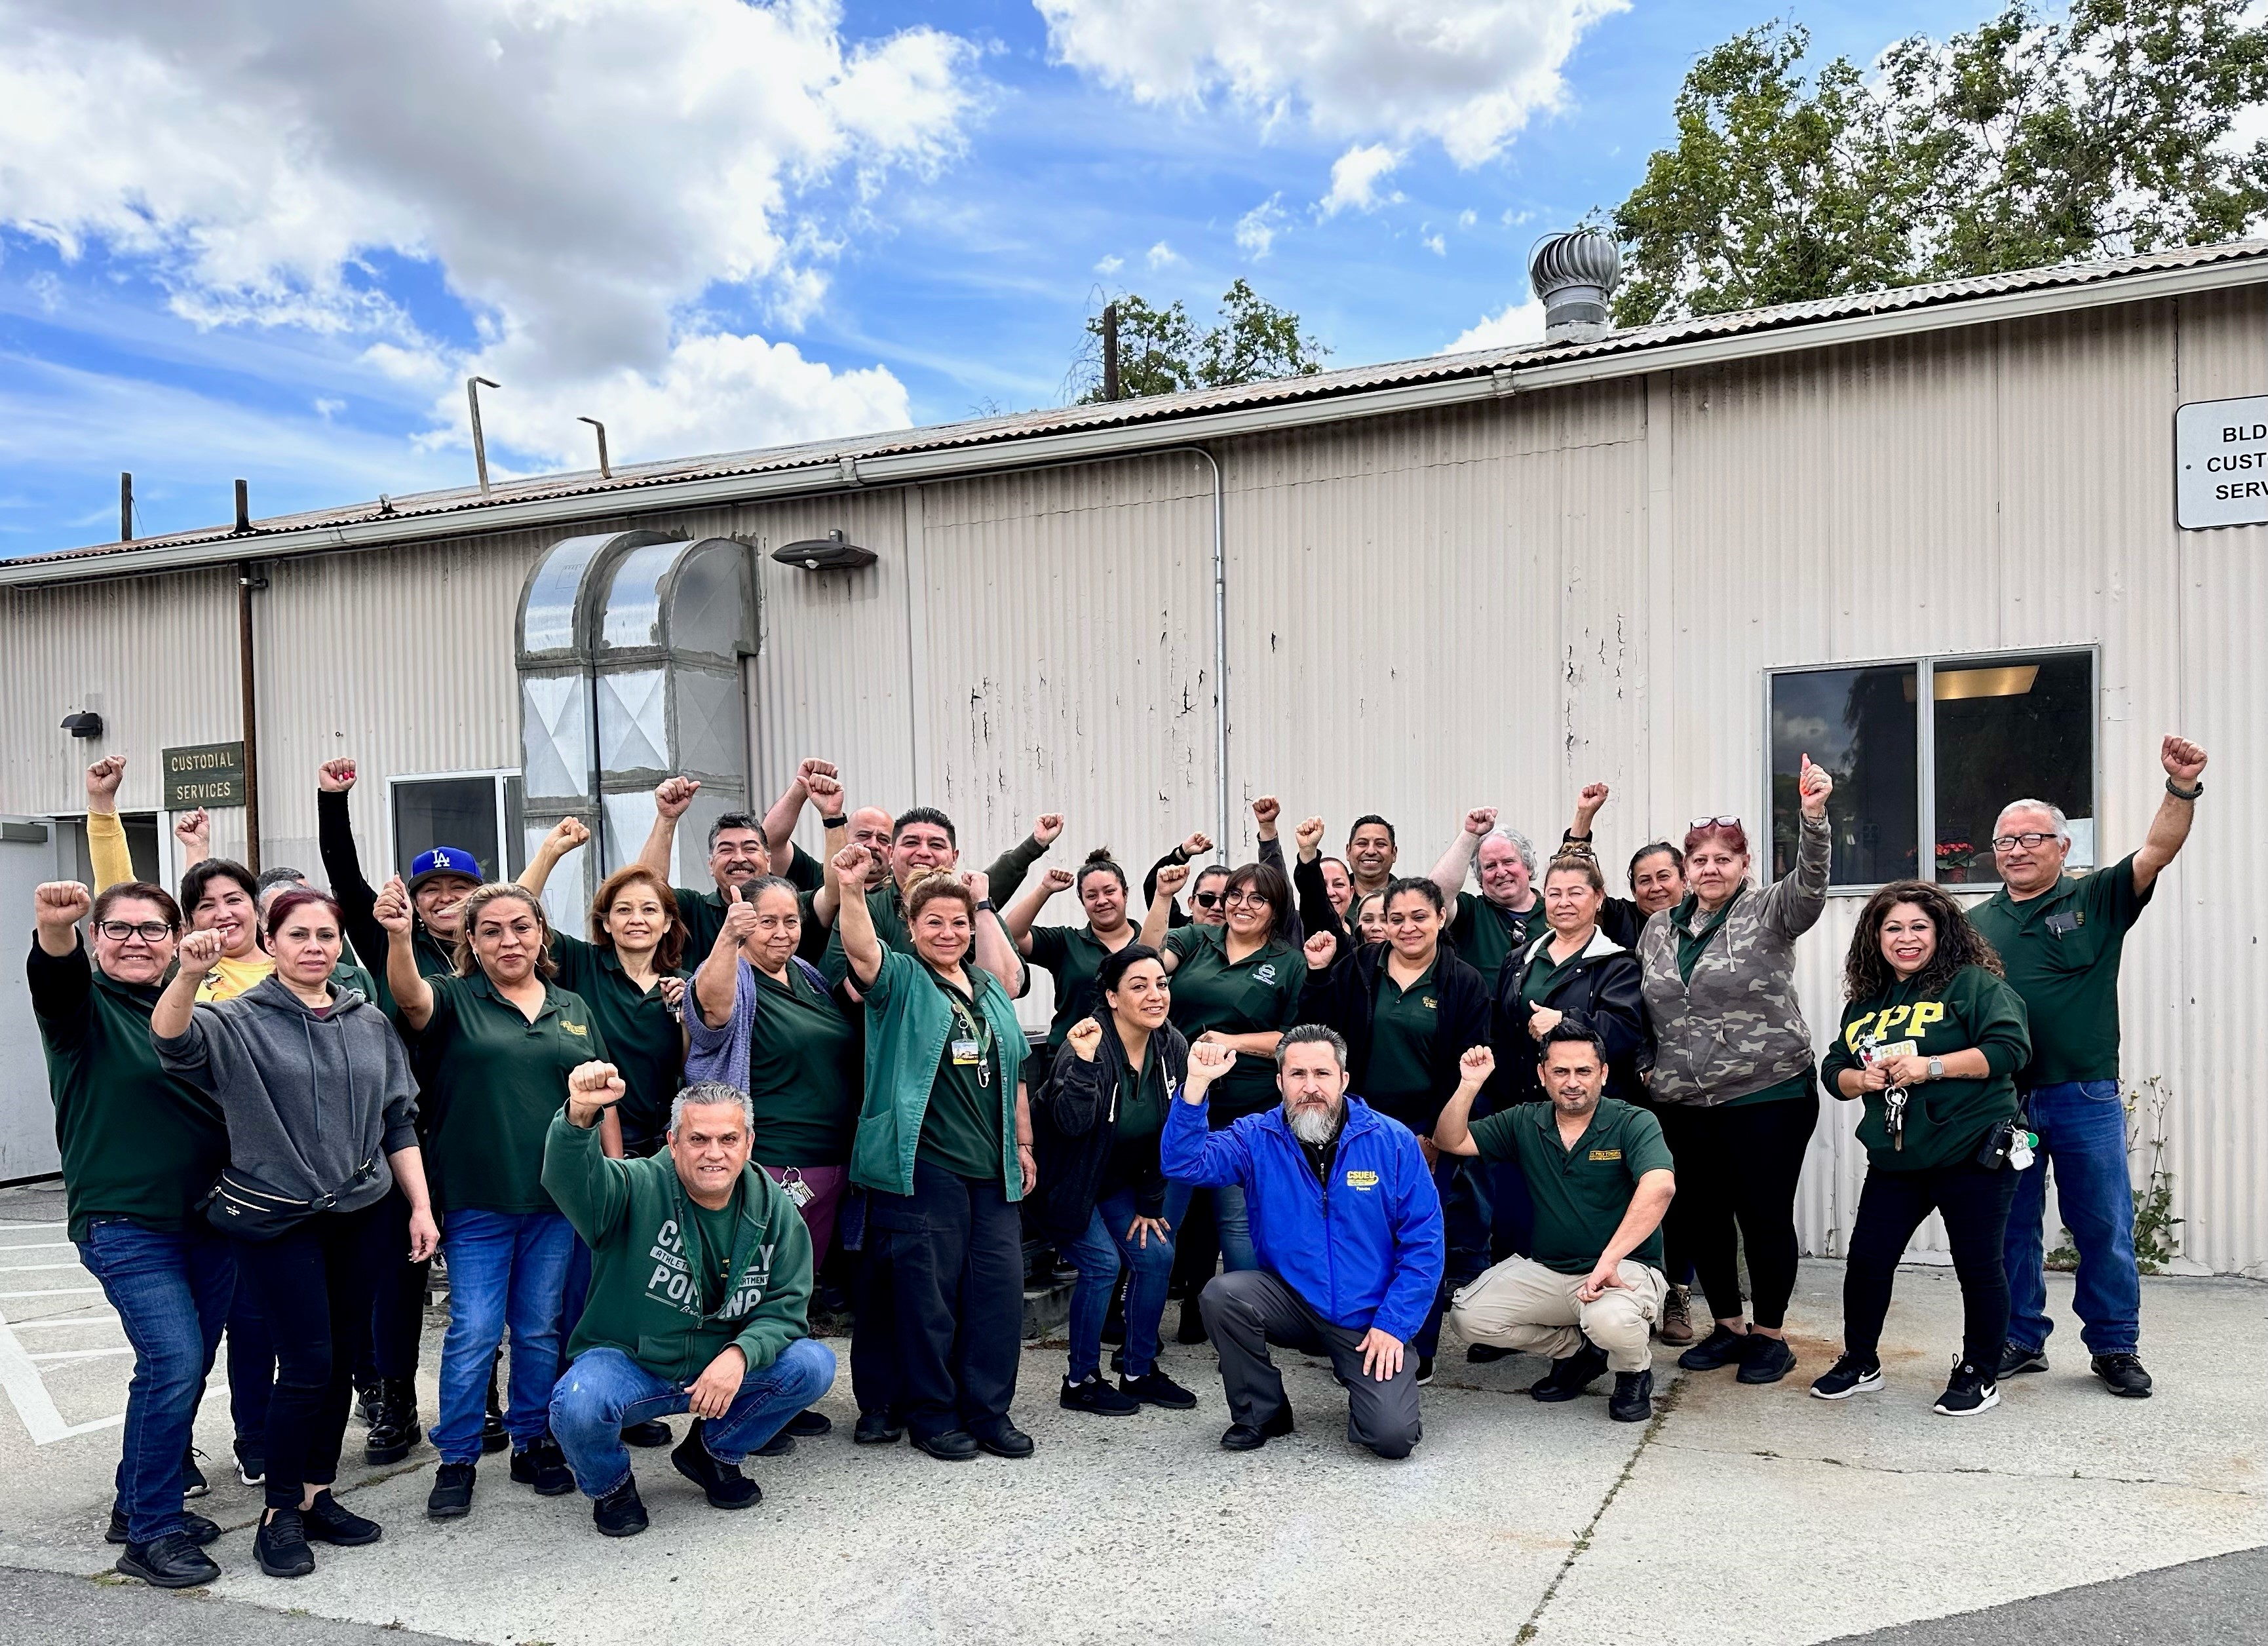 Cal Poly Pomona Custodians in Photograph showing victory sign